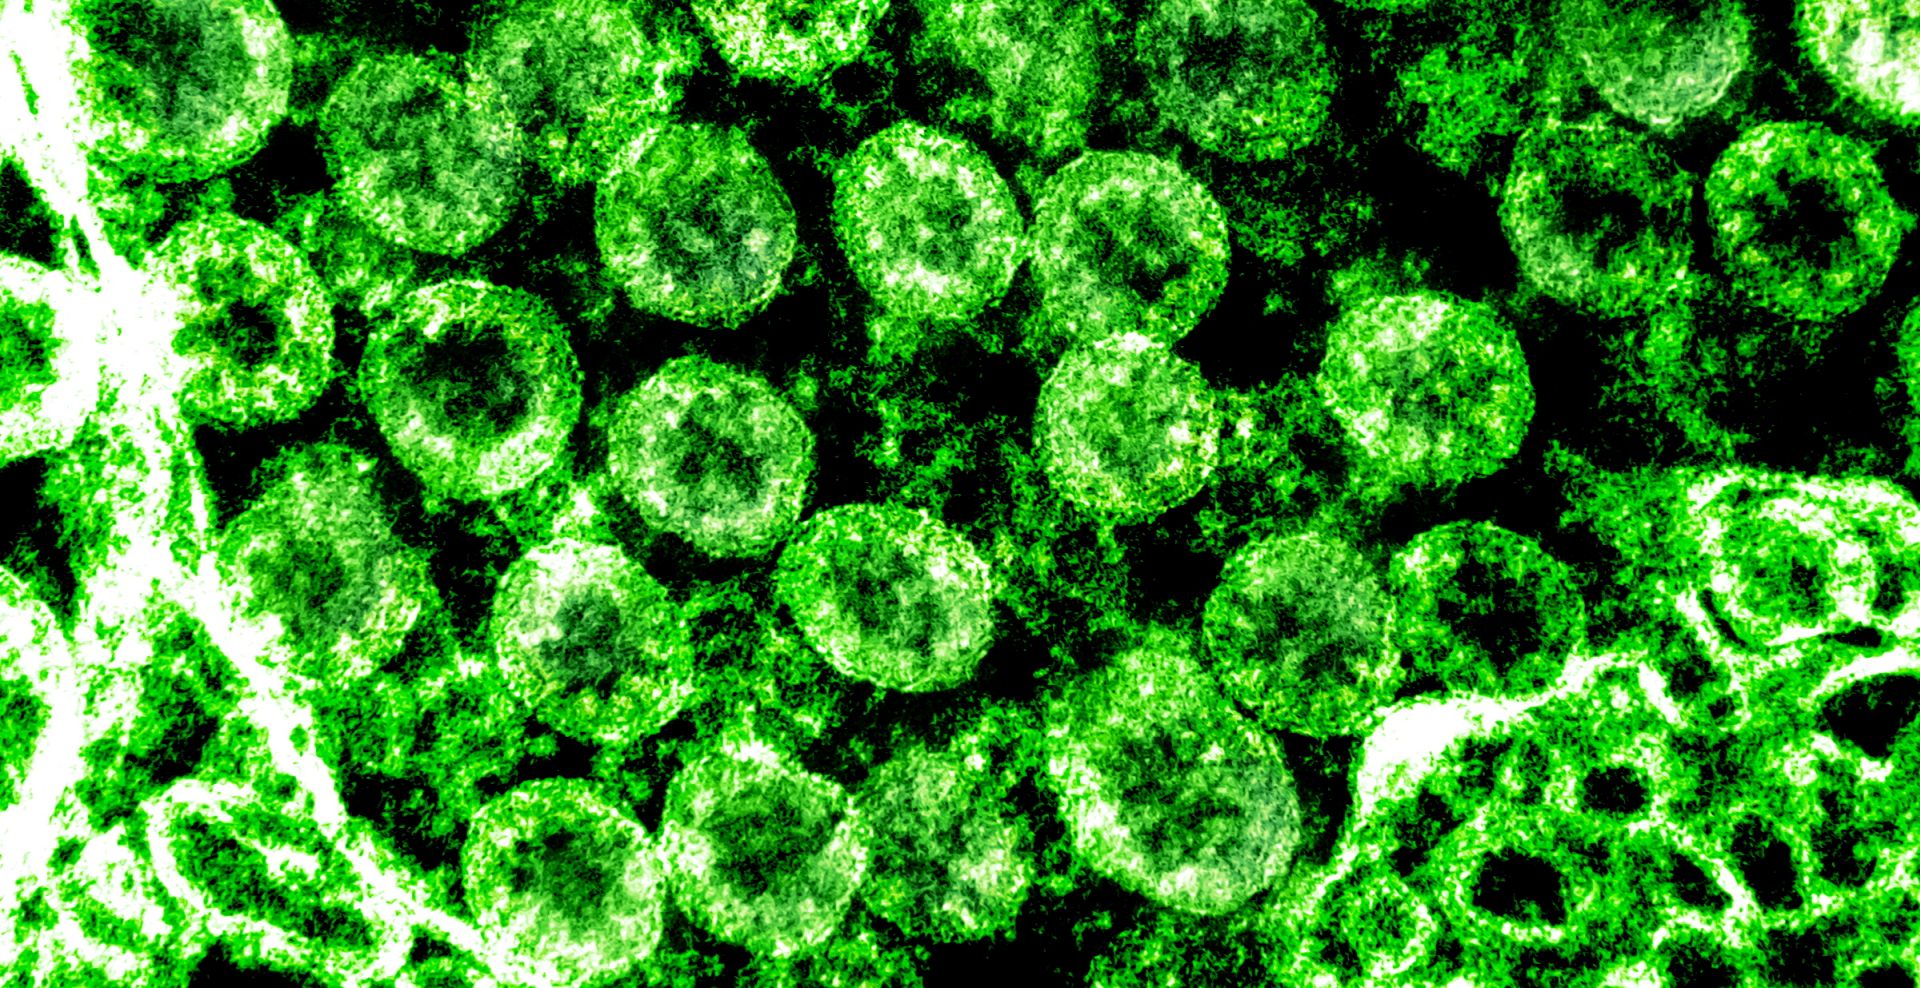 epa08262127 An undated handout picture made available by the National Institutes of Health (NIH) shows a transmission electron micrograph of SARS-CoV-2 virus particles, also known as 2019-nCoV, the virus that causes Covid-19, isolated from a patient (issued 01 March 2020). The image was captured and color-enhanced at the National Institute of Allergy and Infectious Diseases (NIAID) Integrated Research Facility (IRF) in Fort Detrick, Maryland, USA. US health officials announced on 29 February 2020 the first confirmed death from the new coronavirus in the country in Washington State. The novel coronavirus is on the verge of spreading across the world as more Covid-19 cases are emerging outside China with outbreaks in South Korea, Italy and Iran.  EPA/NIAID/NATIONAL INSTITUTES OF HEALTH HANDOUT  HANDOUT EDITORIAL USE ONLY/NO SALES